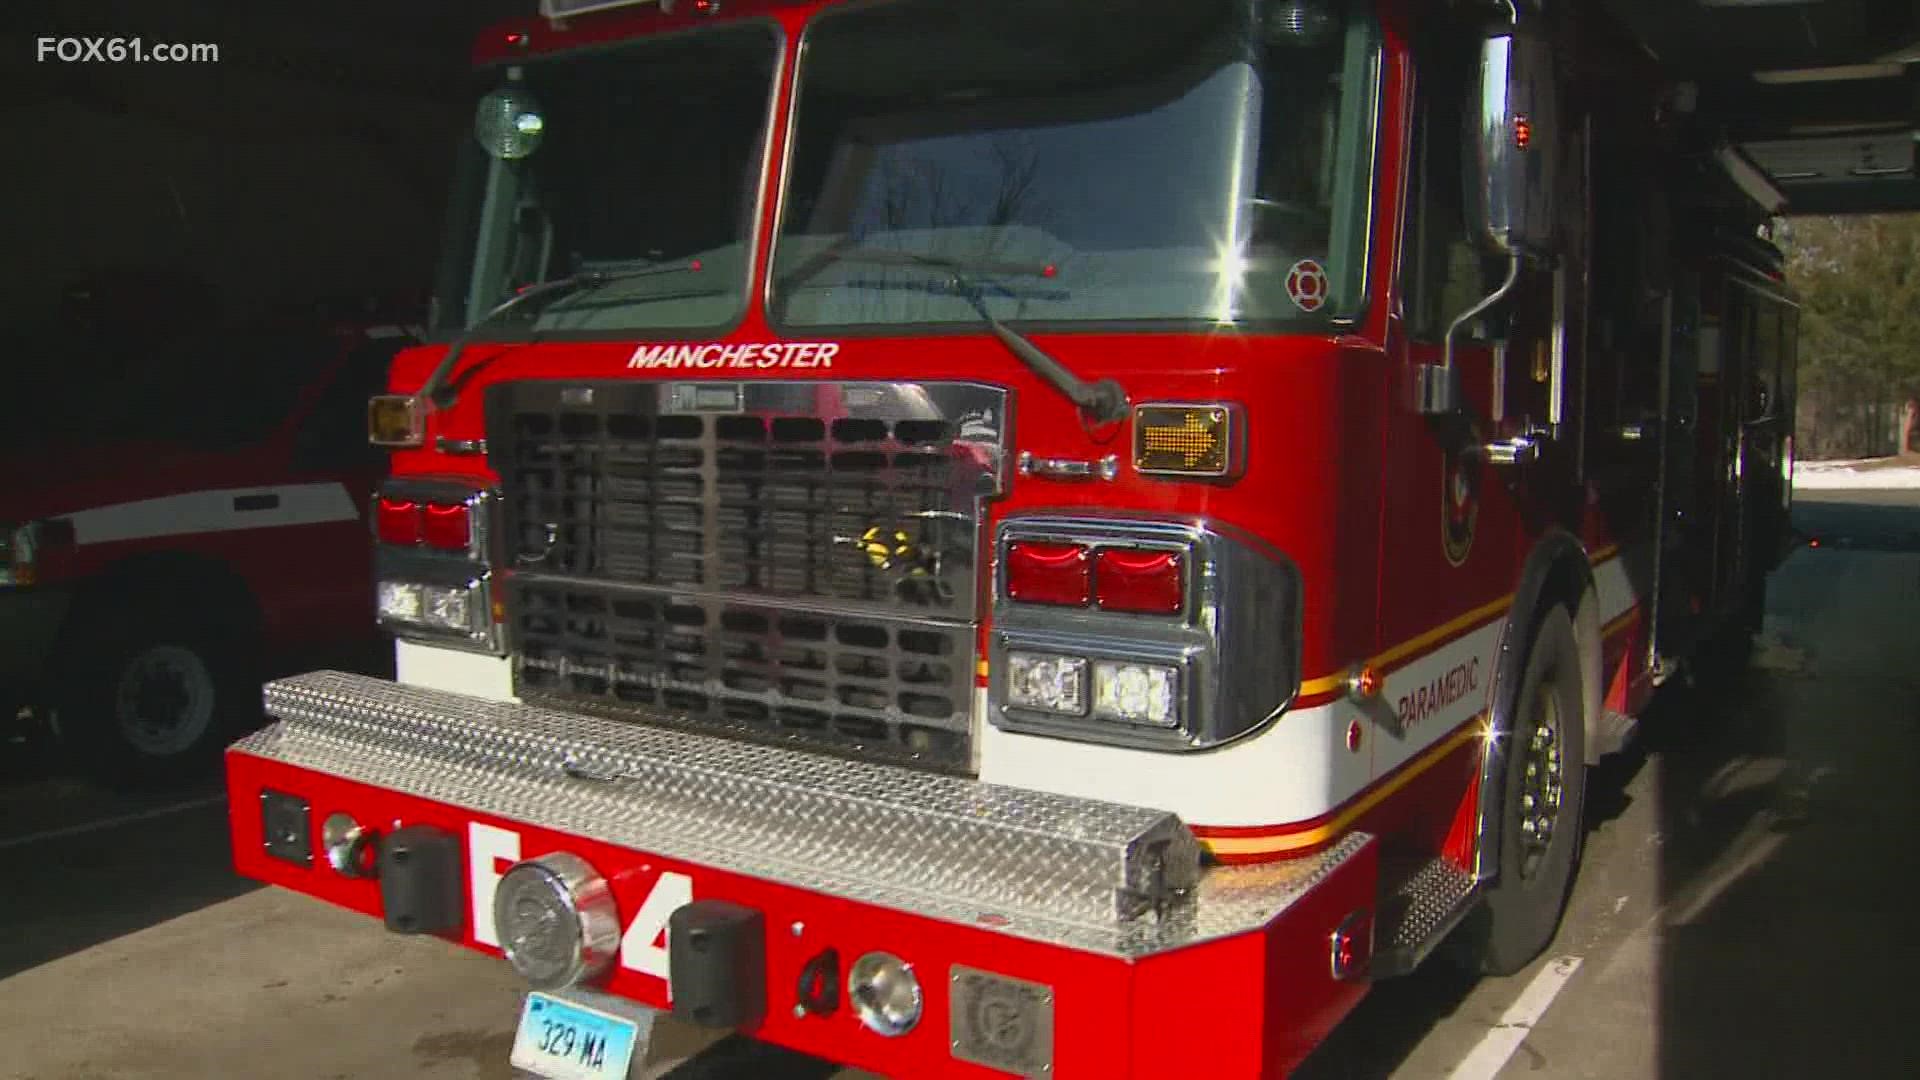 The Manchester fire department says the shortage of first responders is due to the pandemic.